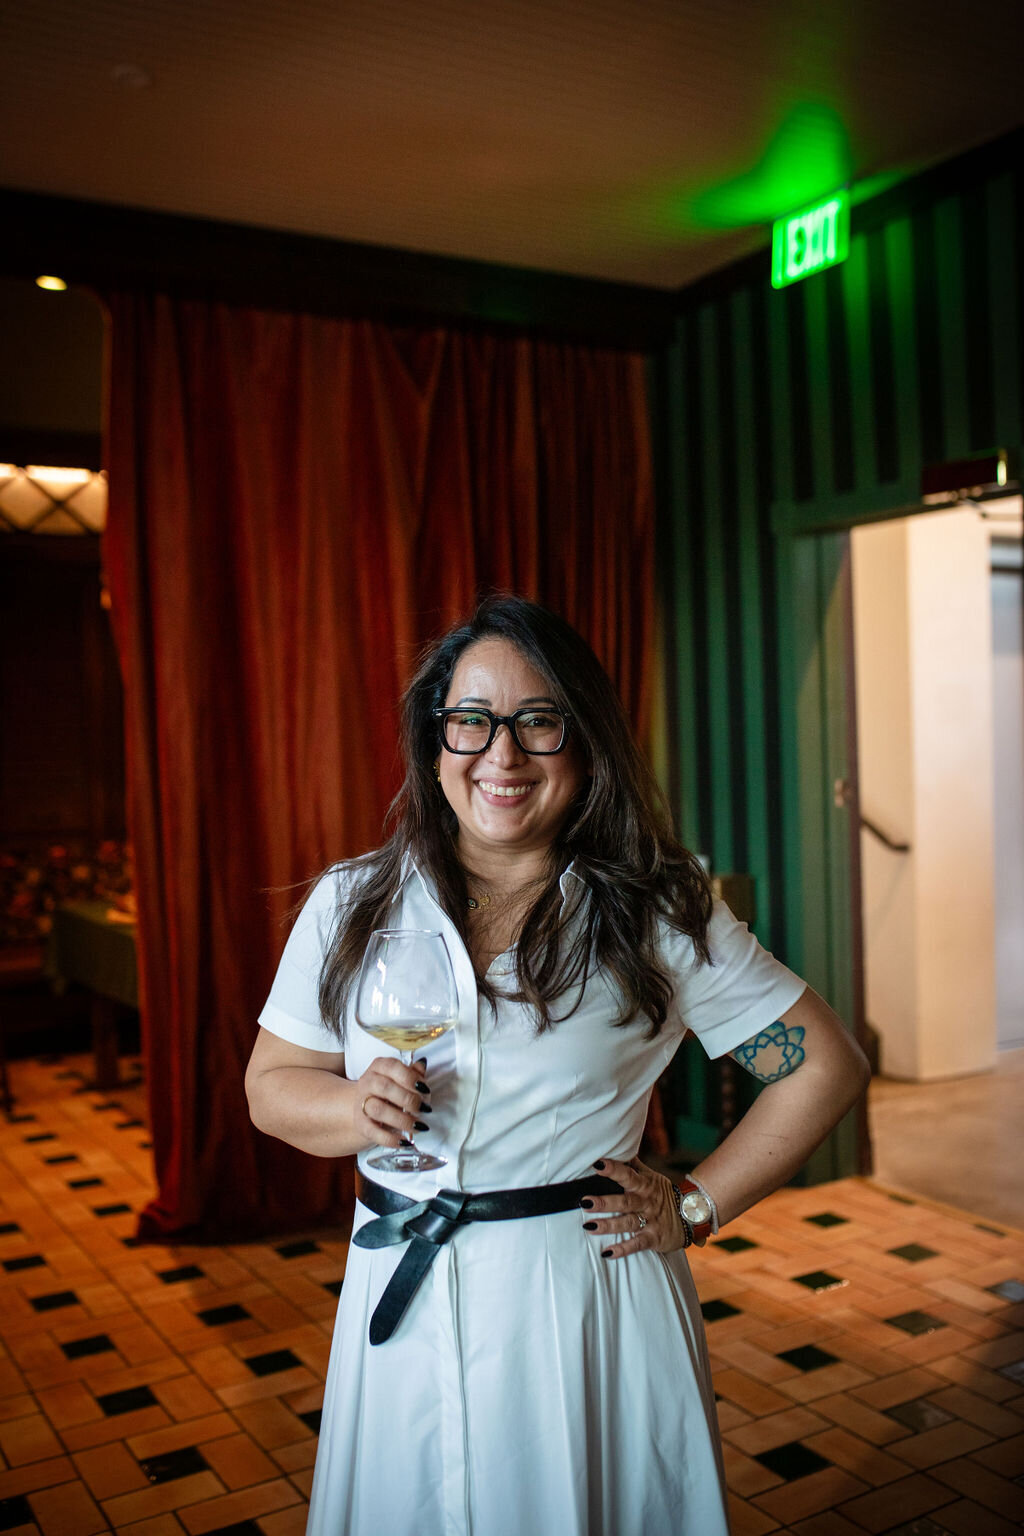 Michiko Sommelier and wine expert at poeta after dark event in austin